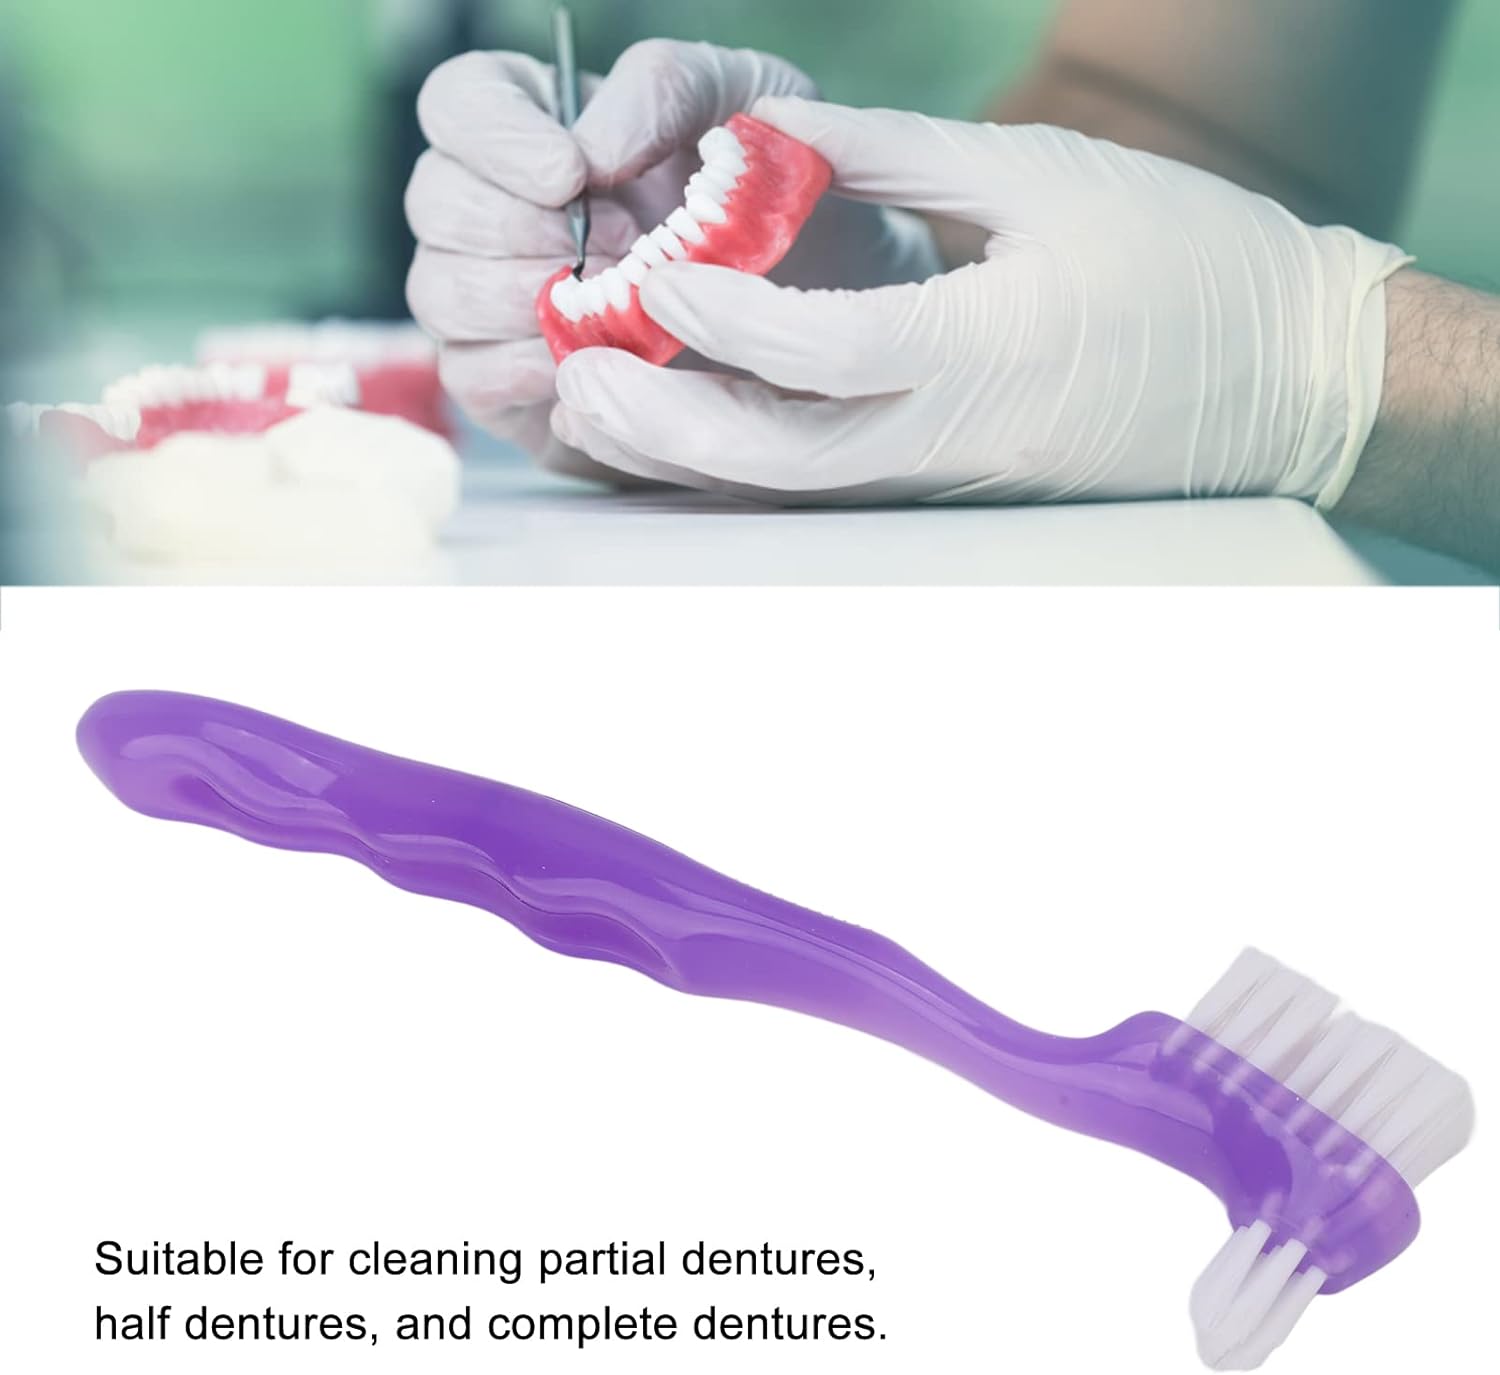 ZJchao False Teeth Cleaning Brush, Elderly Portable False Teeth Container Denture Brush Gift for False Teeth Cleaning Home Travel(Purple)